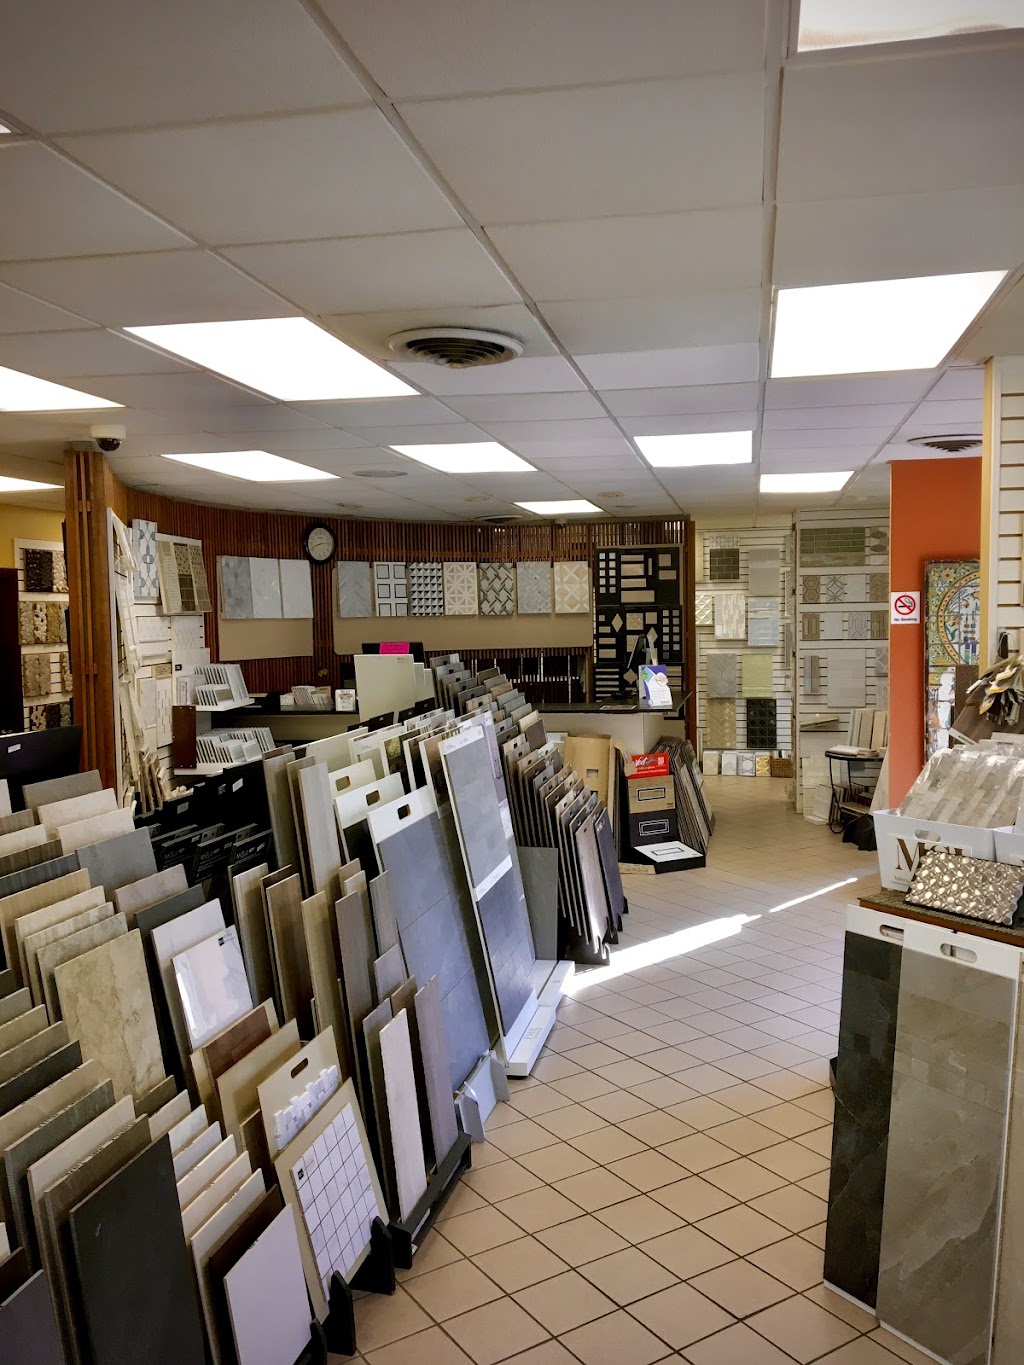 Mohawk Tile & Marble Distribution | 410 Swedeland Rd, King of Prussia, PA 19406 | Phone: (610) 279-2700